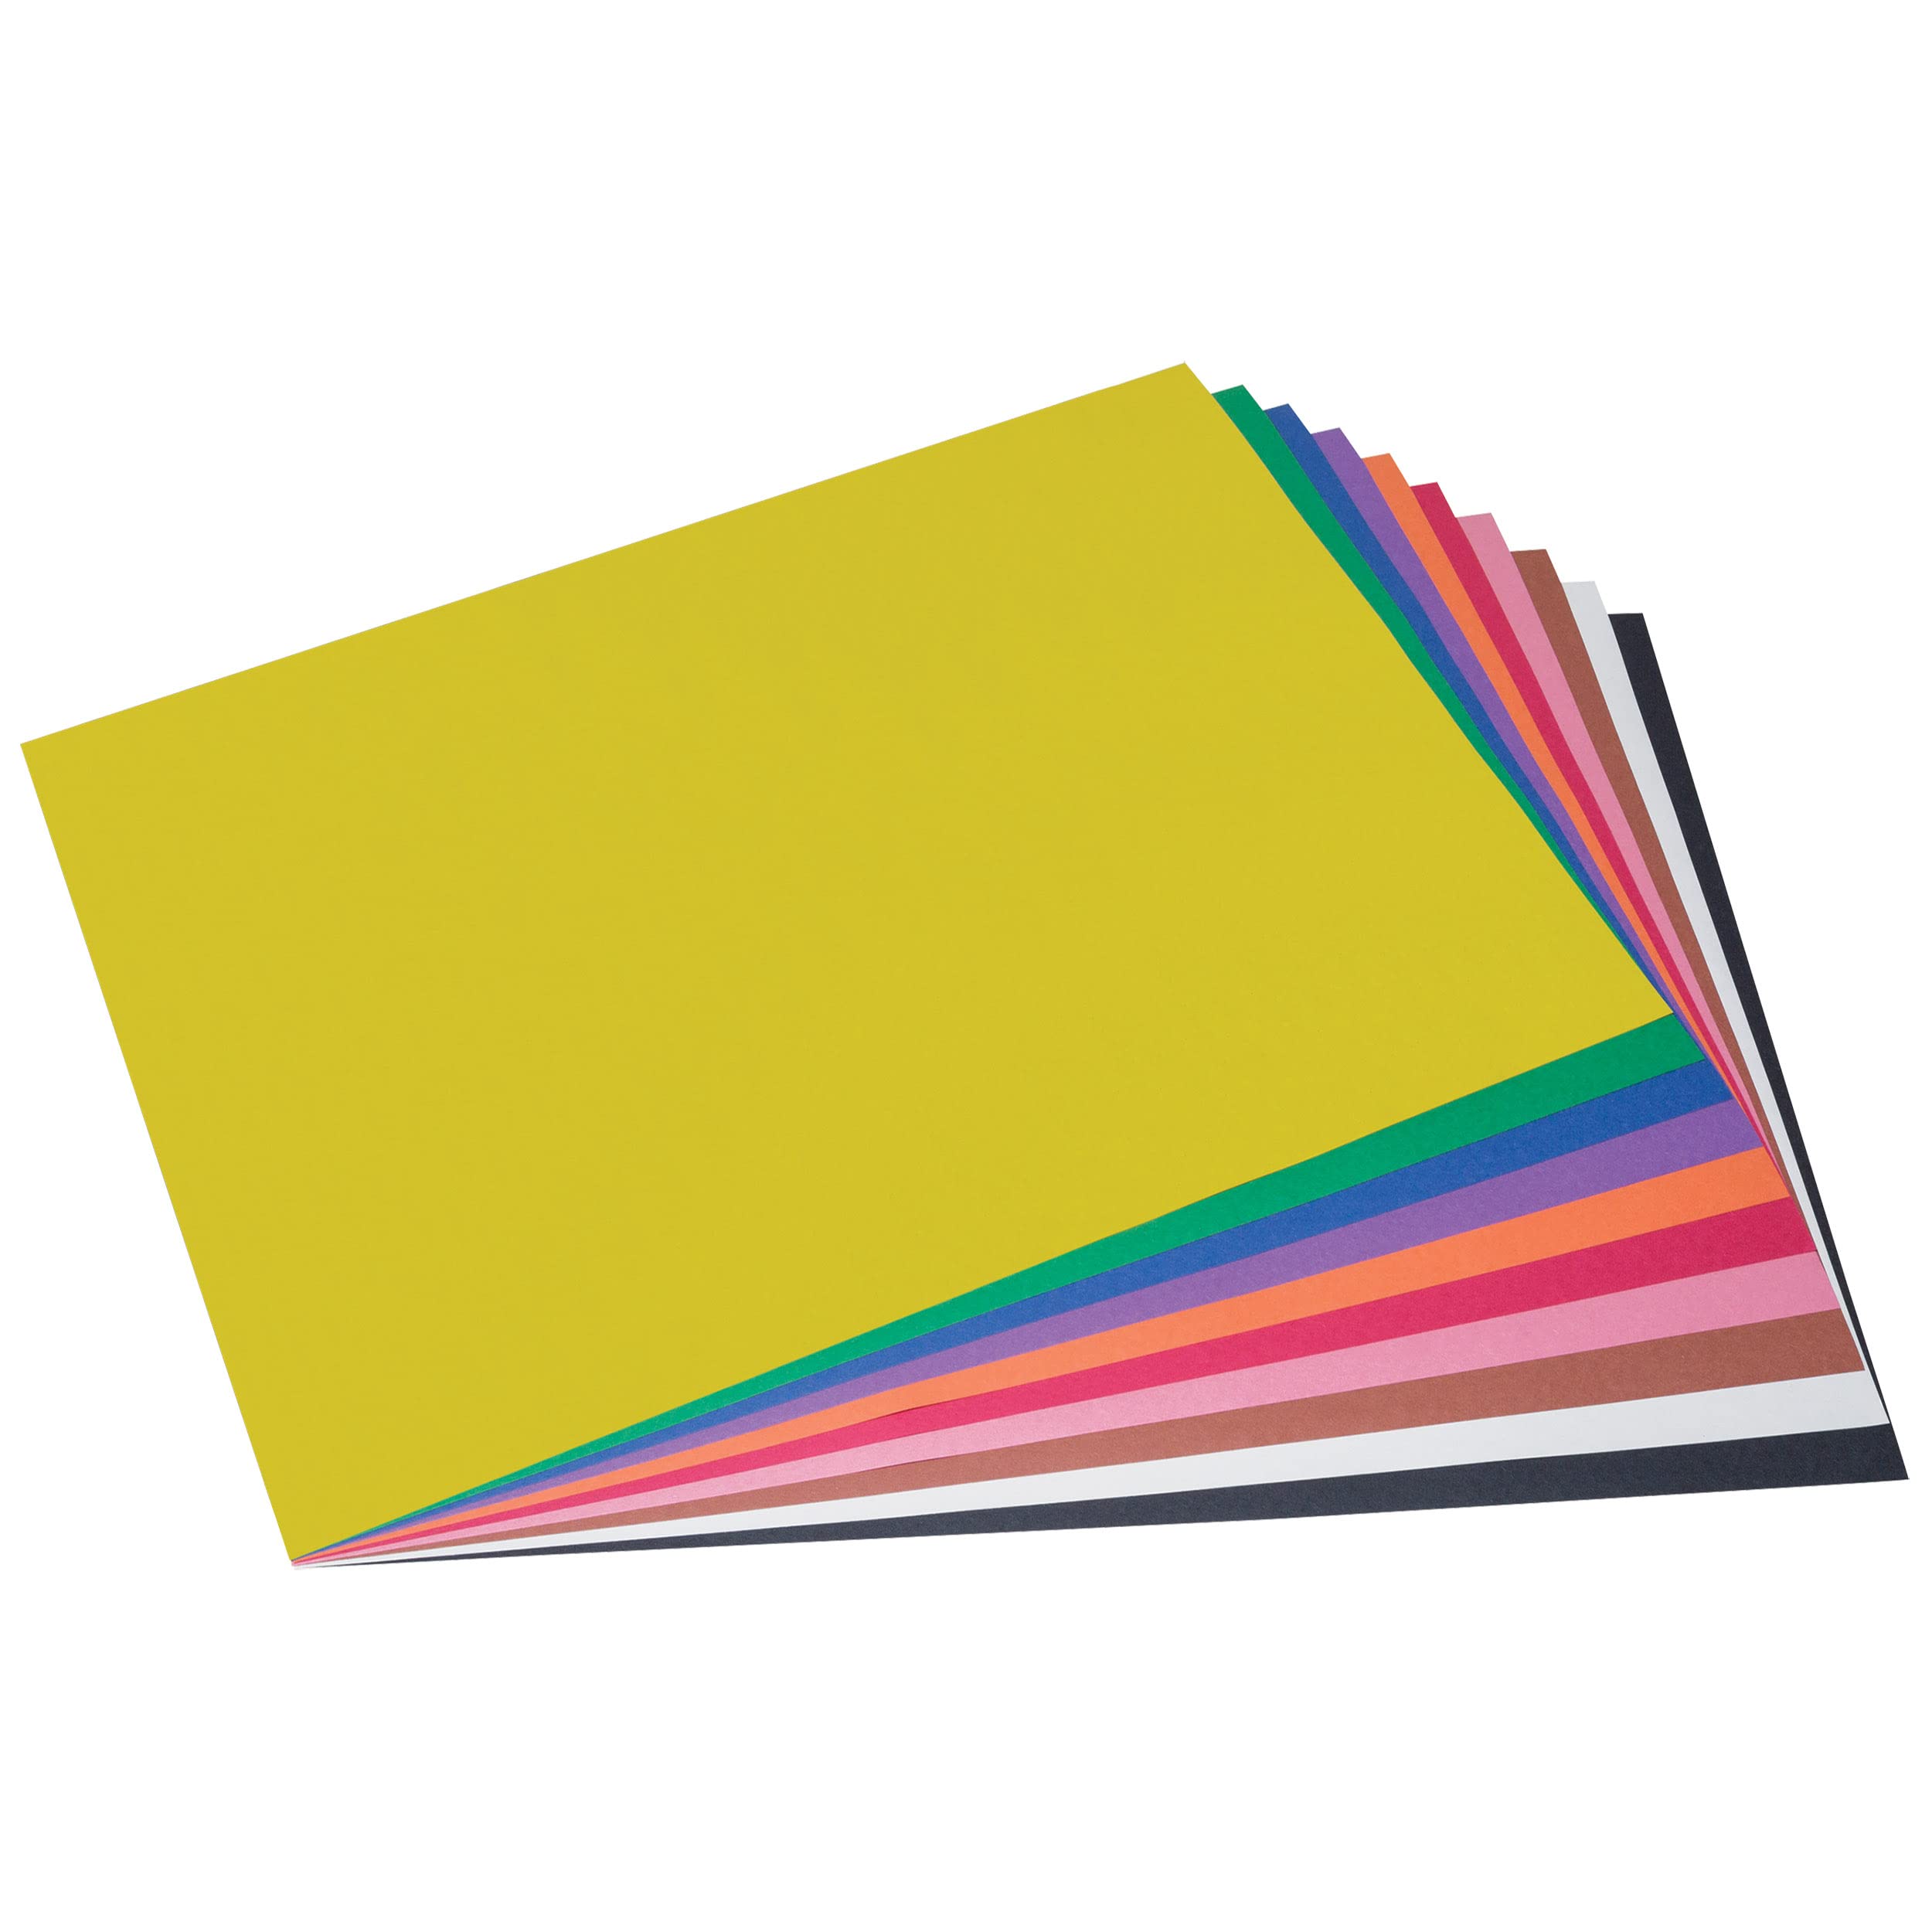 Construction Paper Bright White 9 inches x 12 inches 50 Sheets